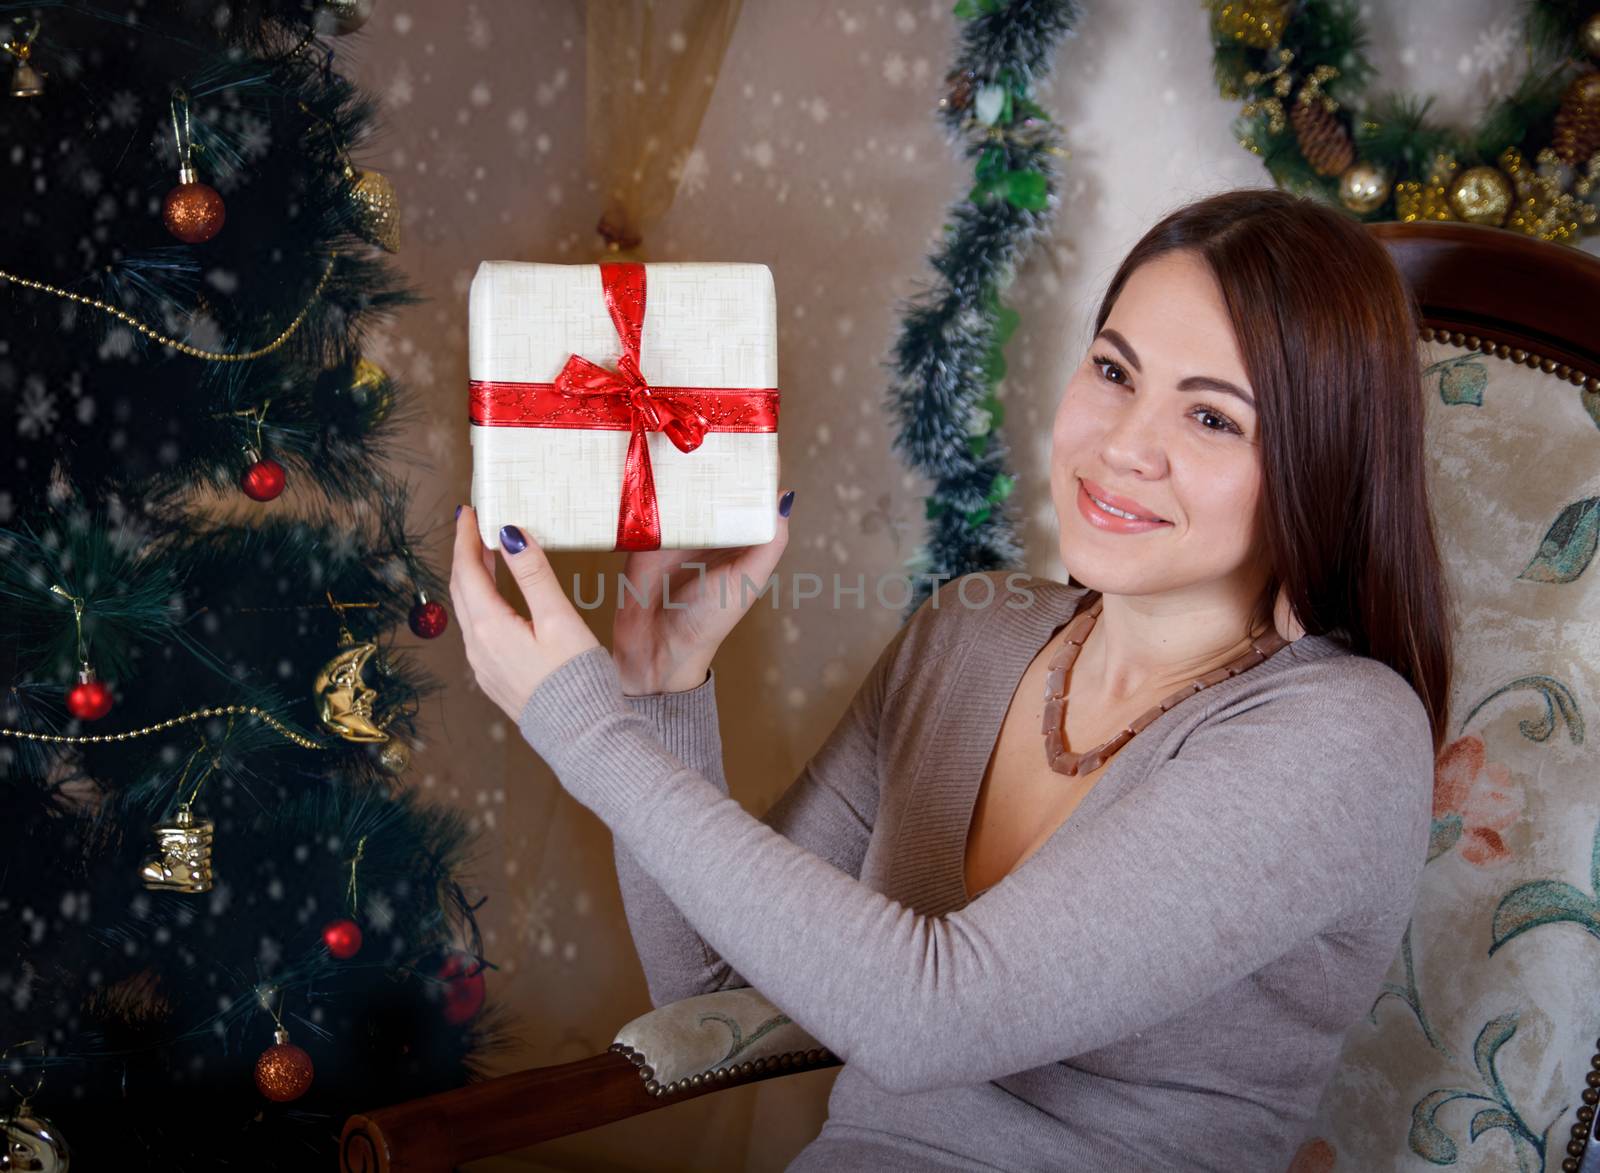 Woman showing gift box under Christmas tree by Angel_a